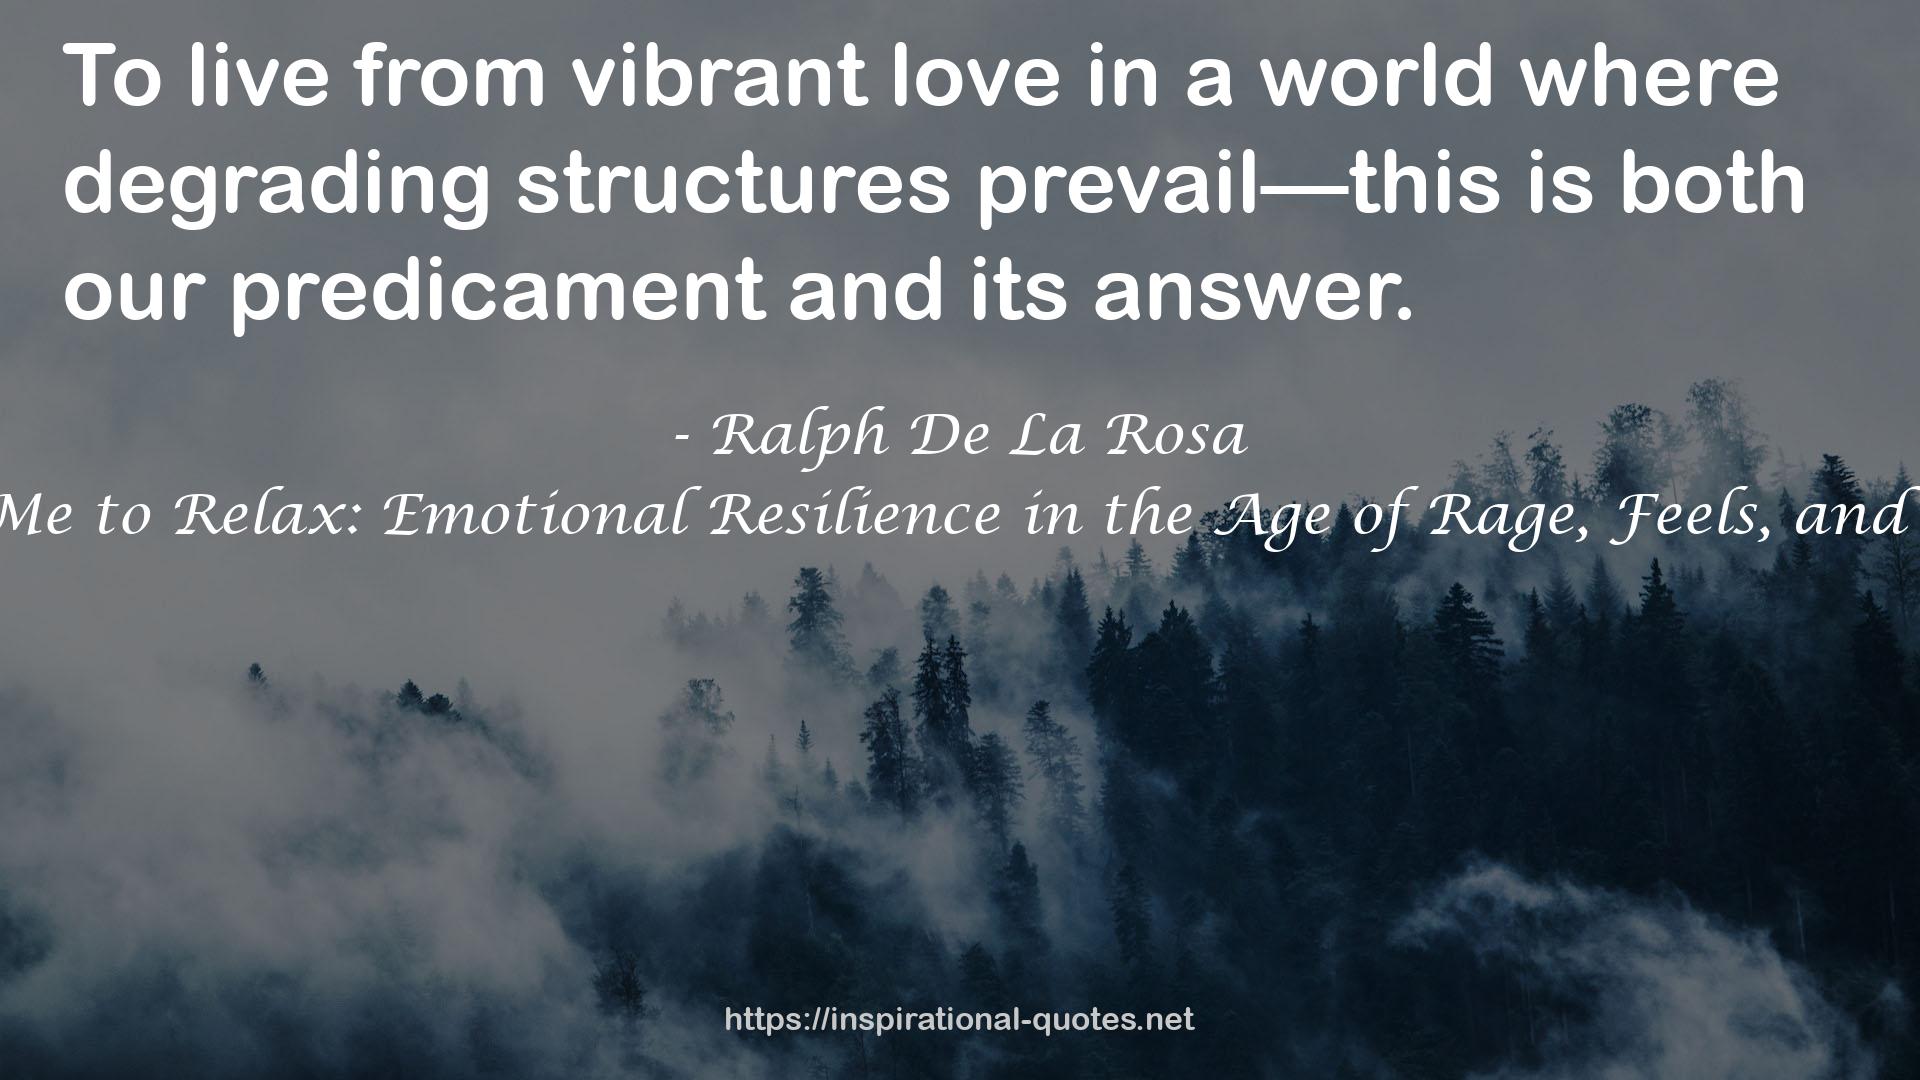 Don't Tell Me to Relax: Emotional Resilience in the Age of Rage, Feels, and Freak-Outs QUOTES